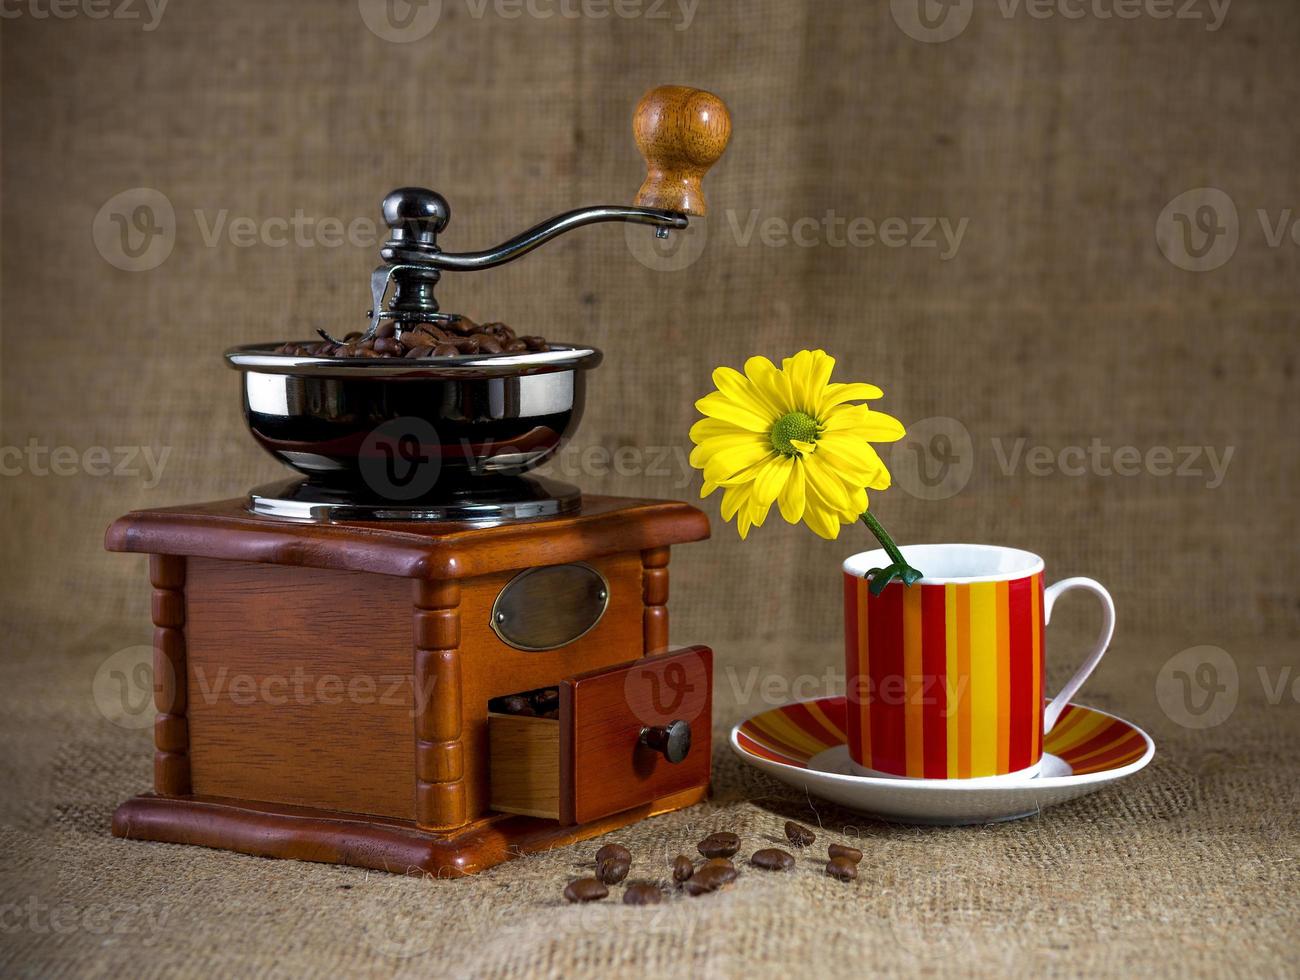 An old coffee grinder and a Cup of coffee with a yellow flower photo